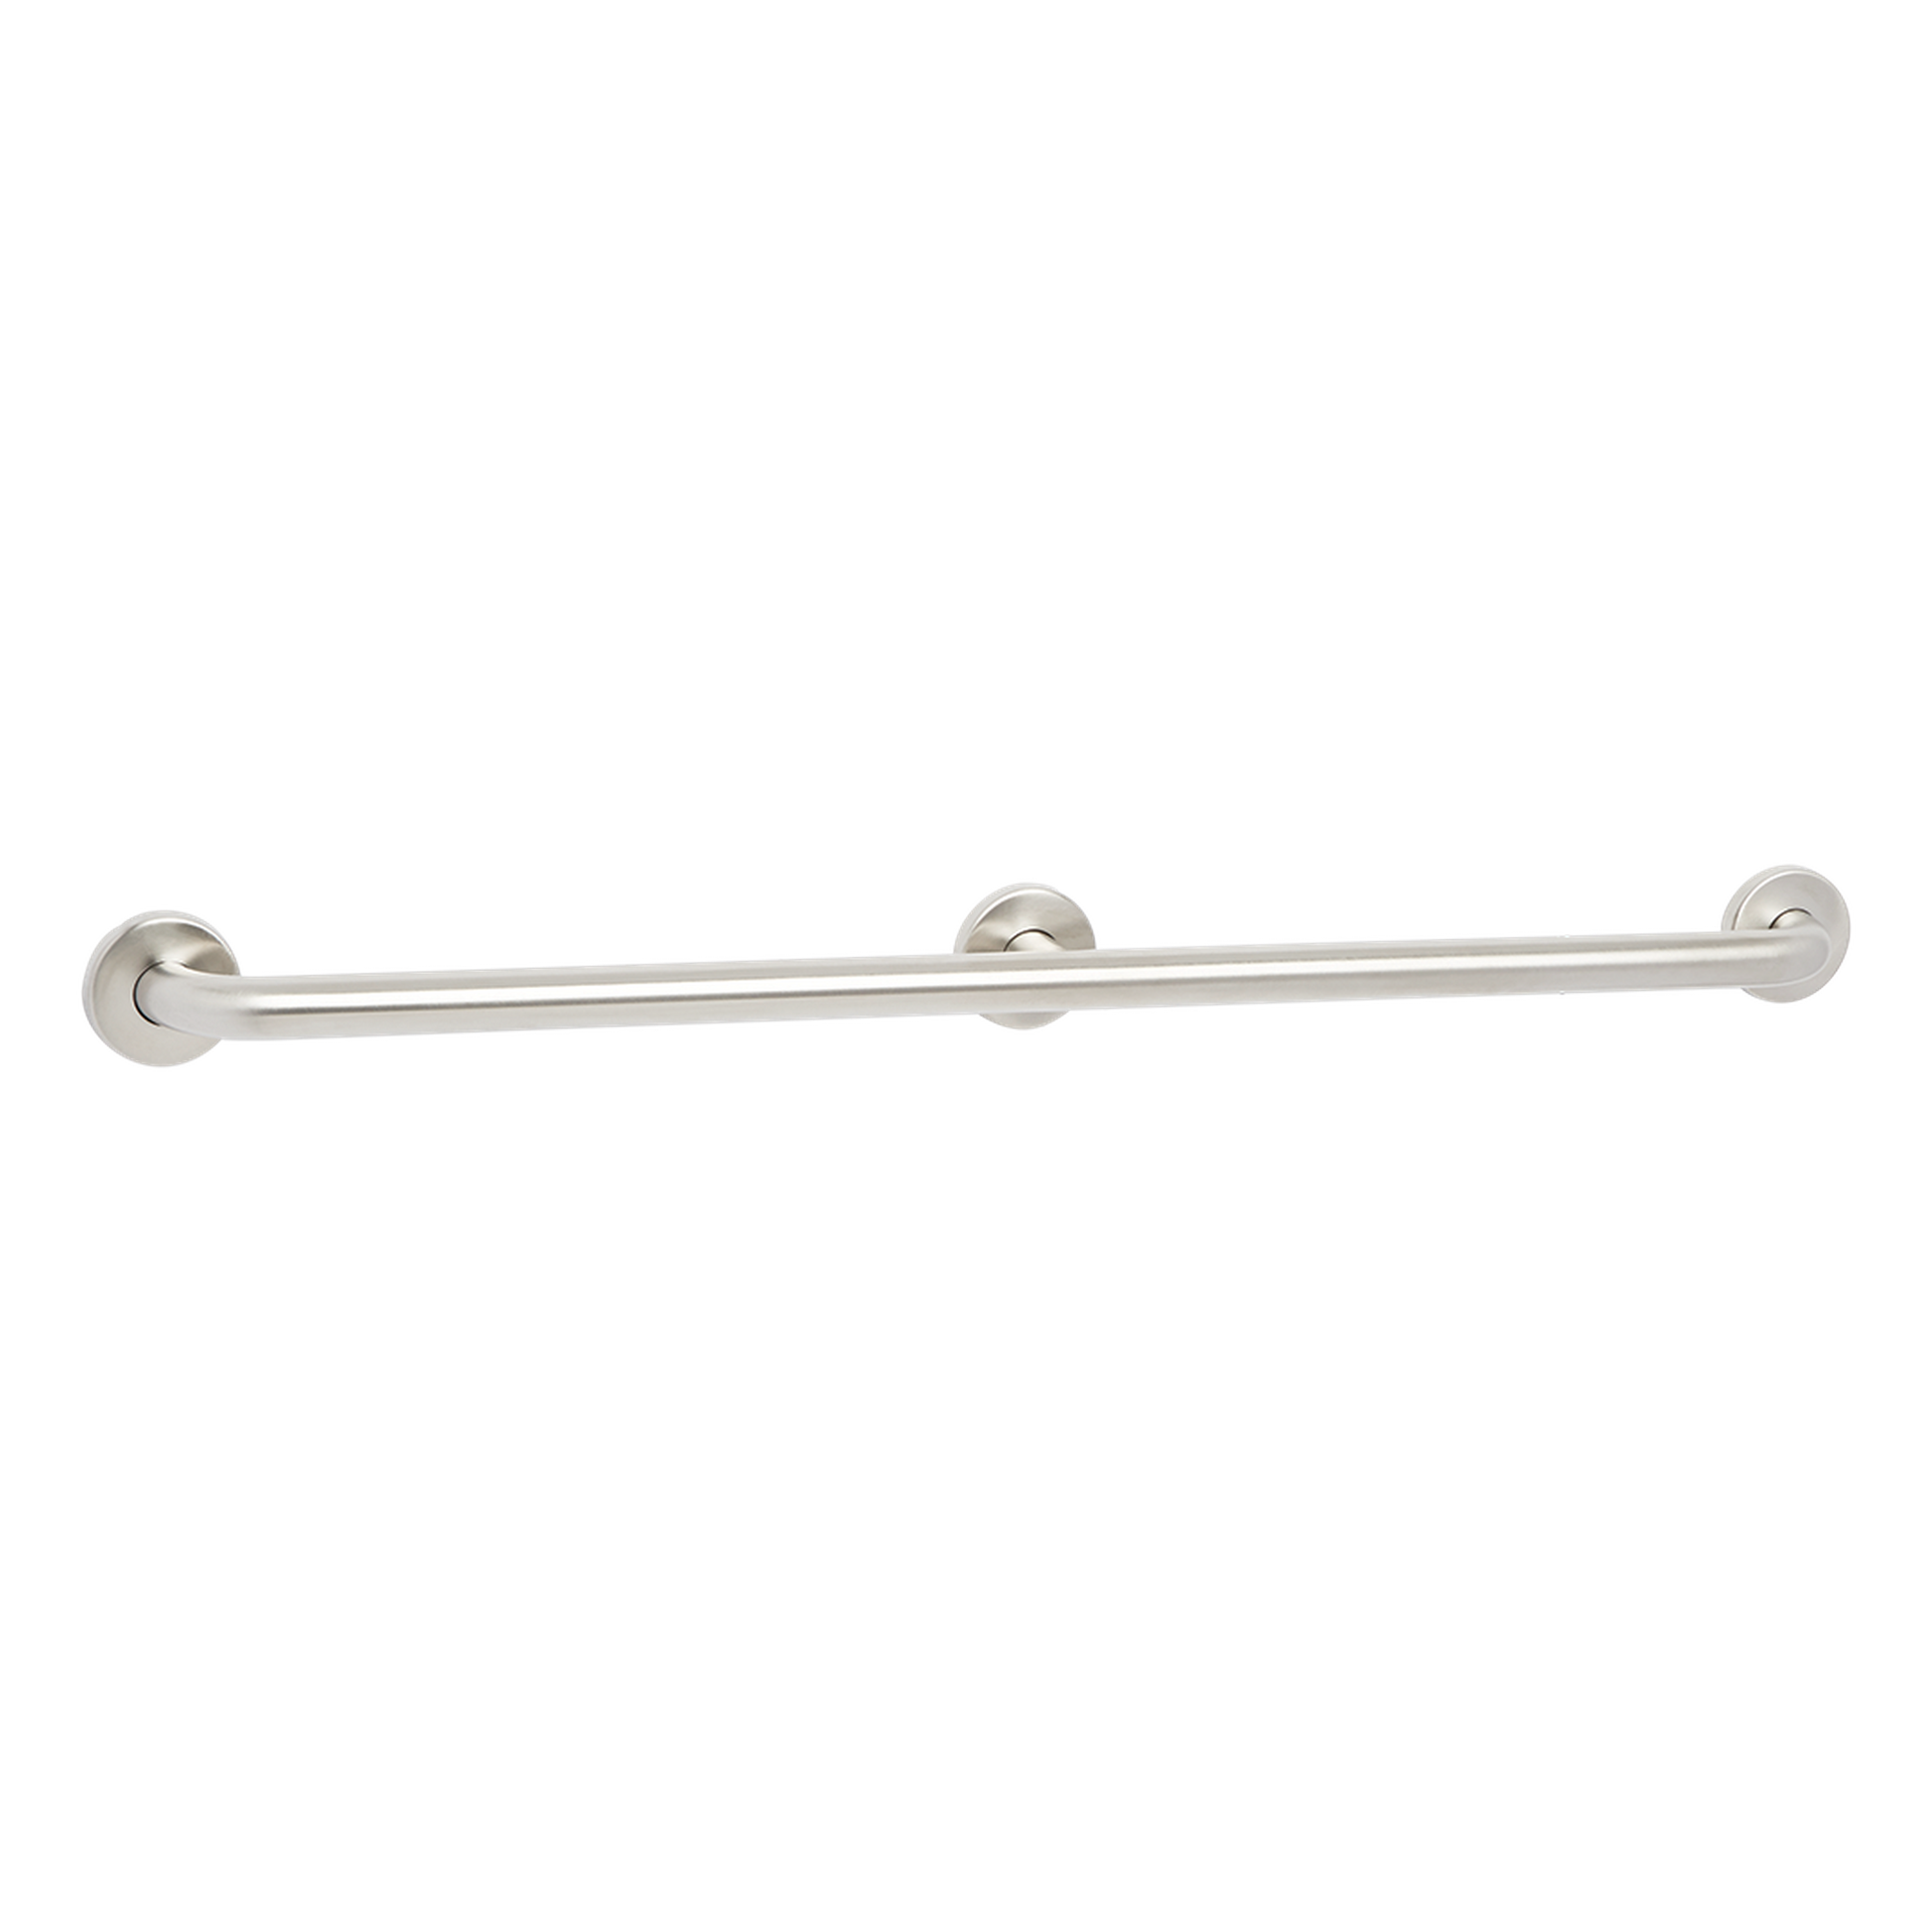 Seachrome Signature Series 54" Satin Stainless Steel 1.25" Bar Diameter Exposed Flange Straight Grab Bar With Center Post